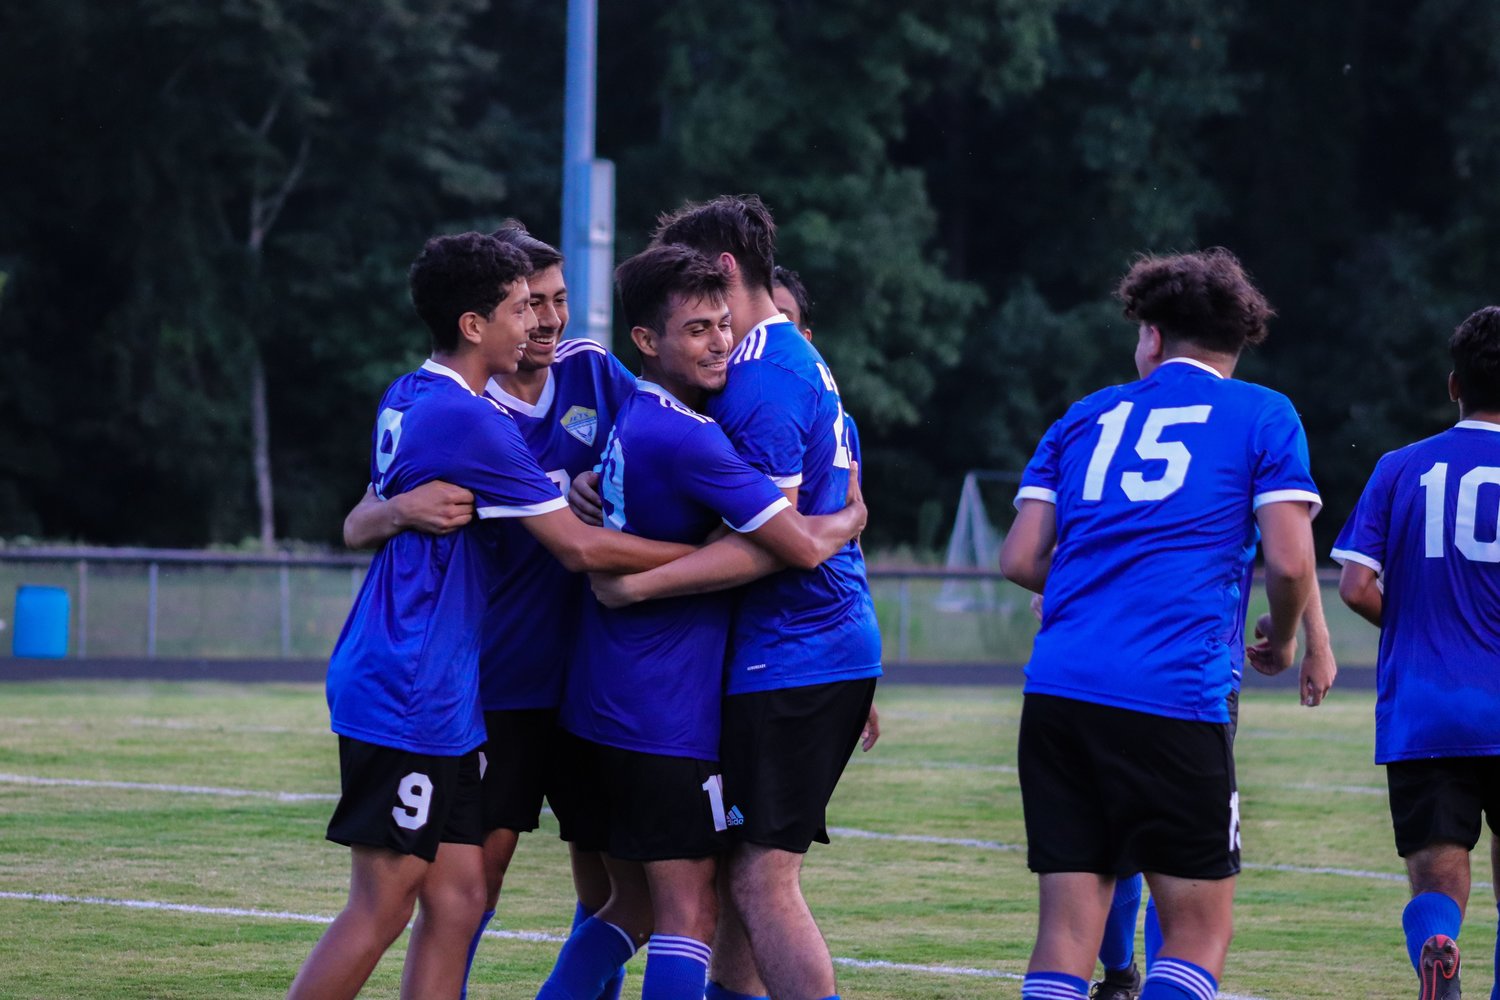 Jordan-Matthews players celebrate one of the team's four goals in the Jets' 4-1 season-opening win over Northwood last Thursday in Siler City. J-M came back from a 1-0 deficit in the first half to win, scoring four unanswered goals in the process.